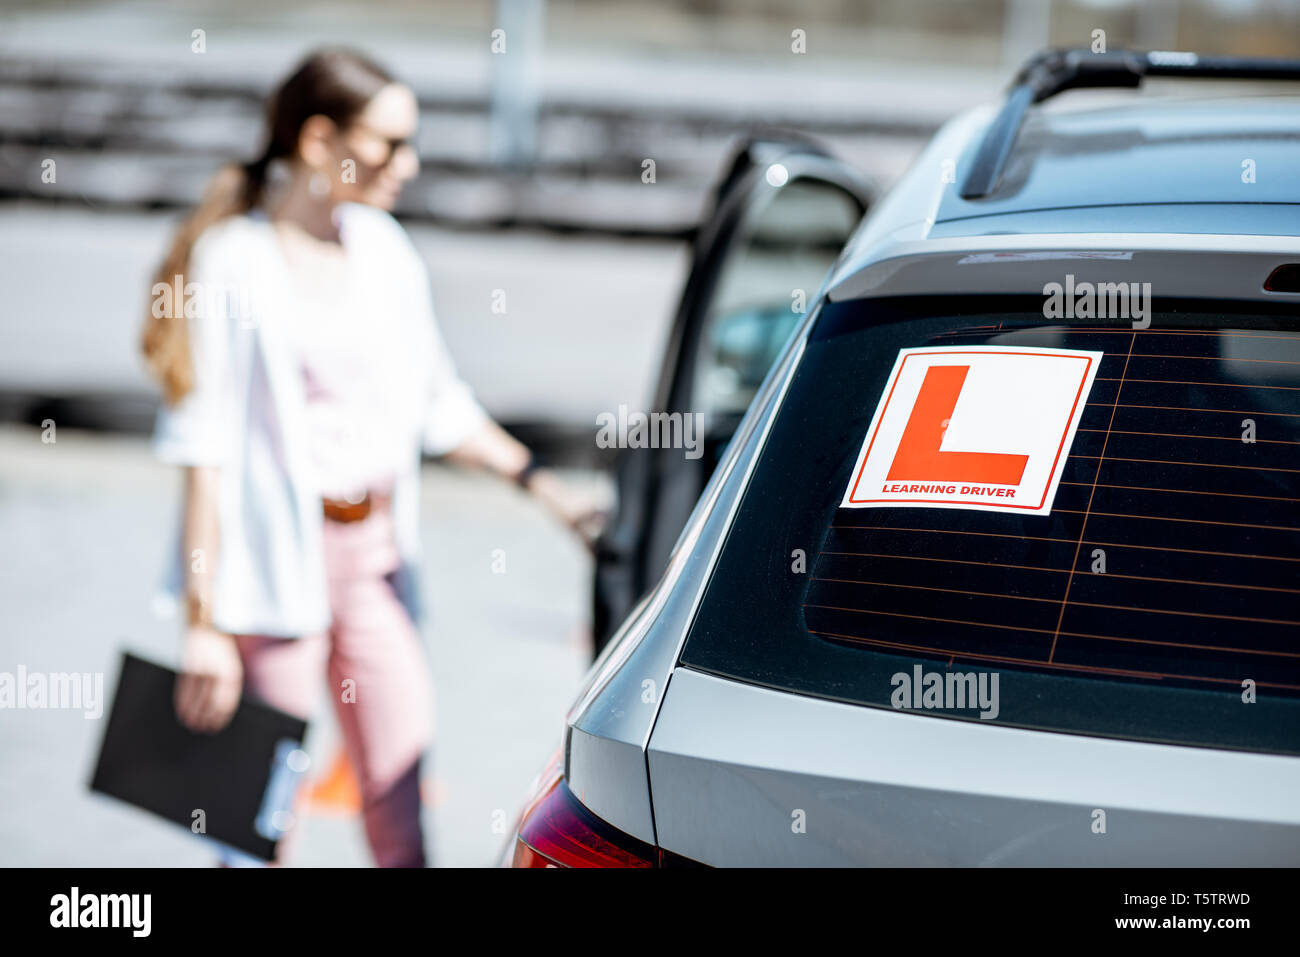 Learning sign on the car with woman driver on the background at the driving school outdoors Stock Photo